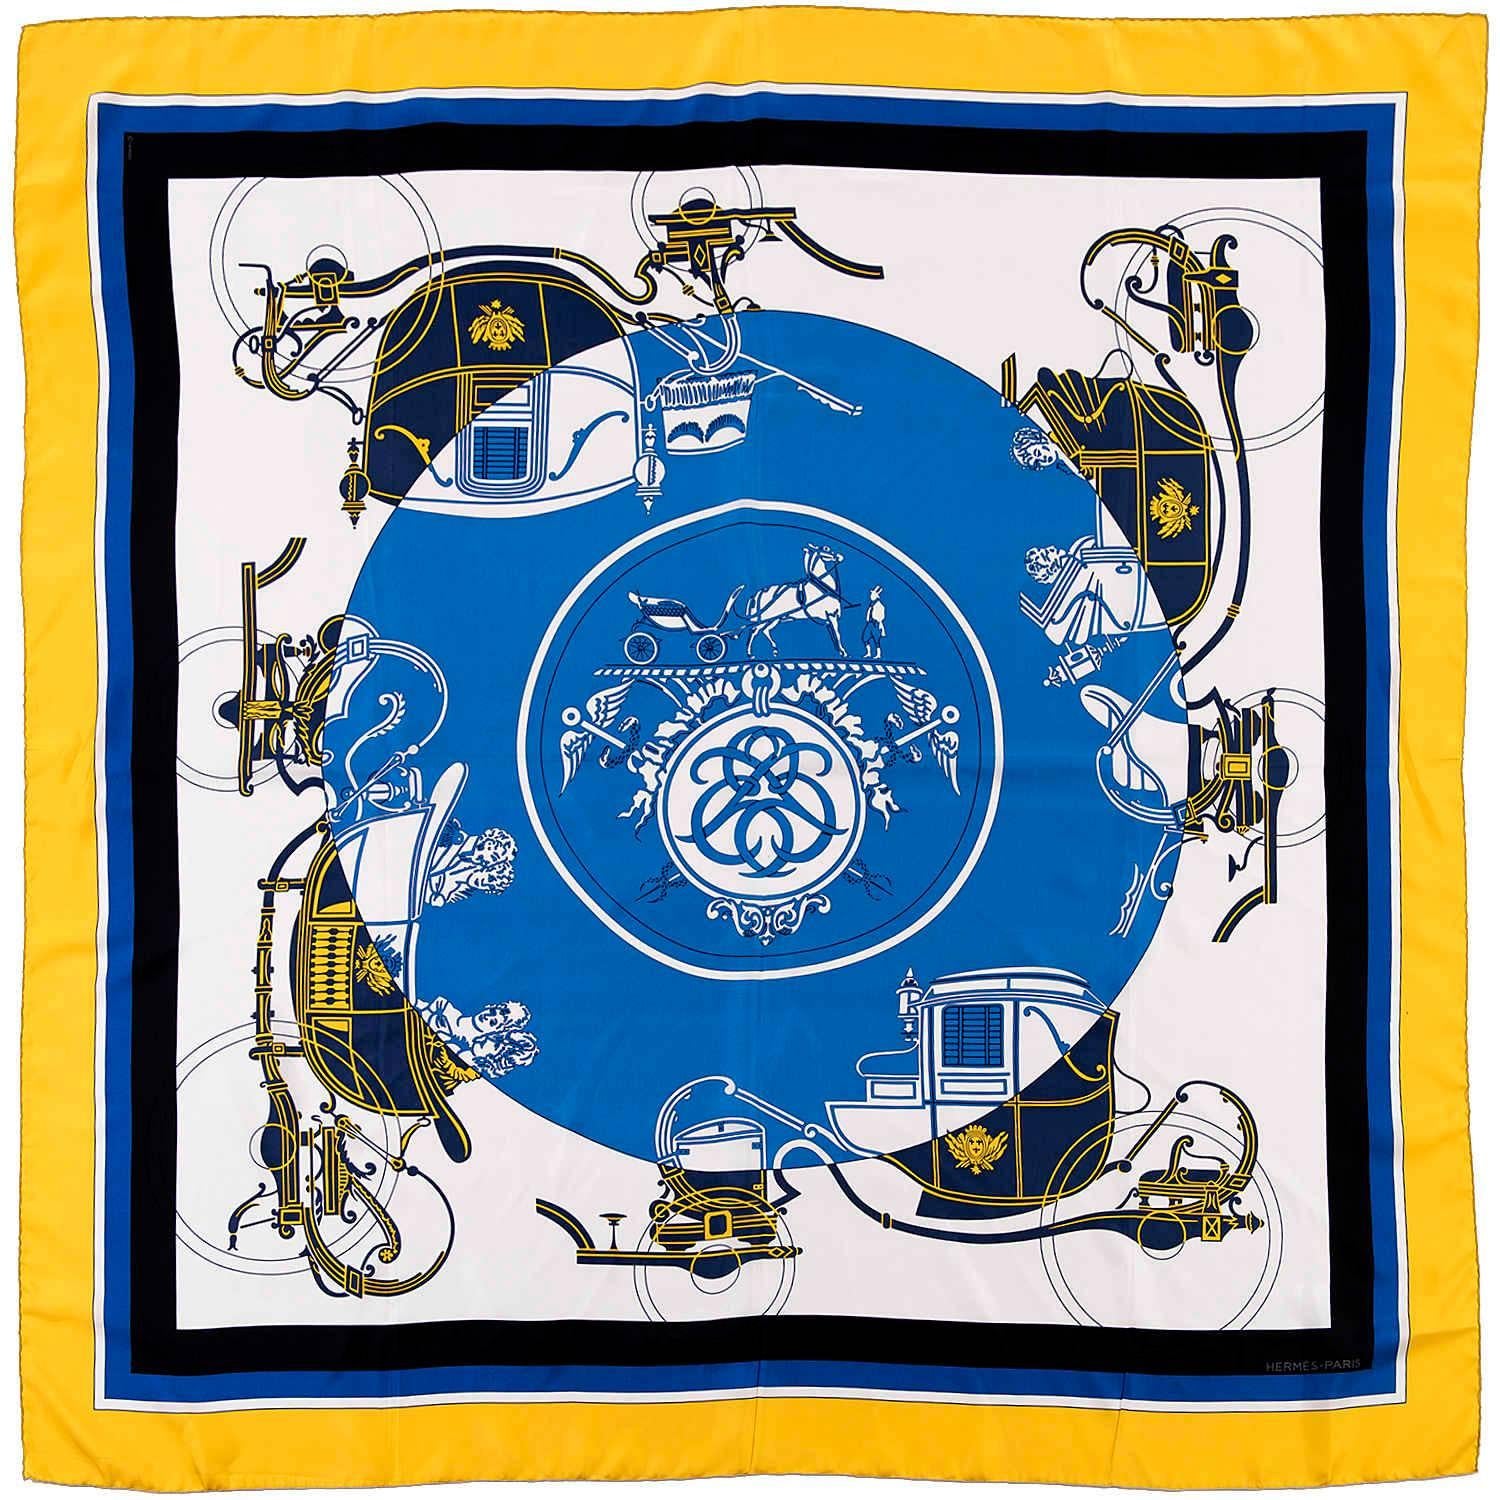 With Summer in mind, this rare piece by the legendary Hermes Designer Hugo Grygkar, was first released in 1946 and is unavailable to buy, now. 'Ex-libris Colorise' is a wonderful fantasy of colour, with navy blue, black, light blue and white with a